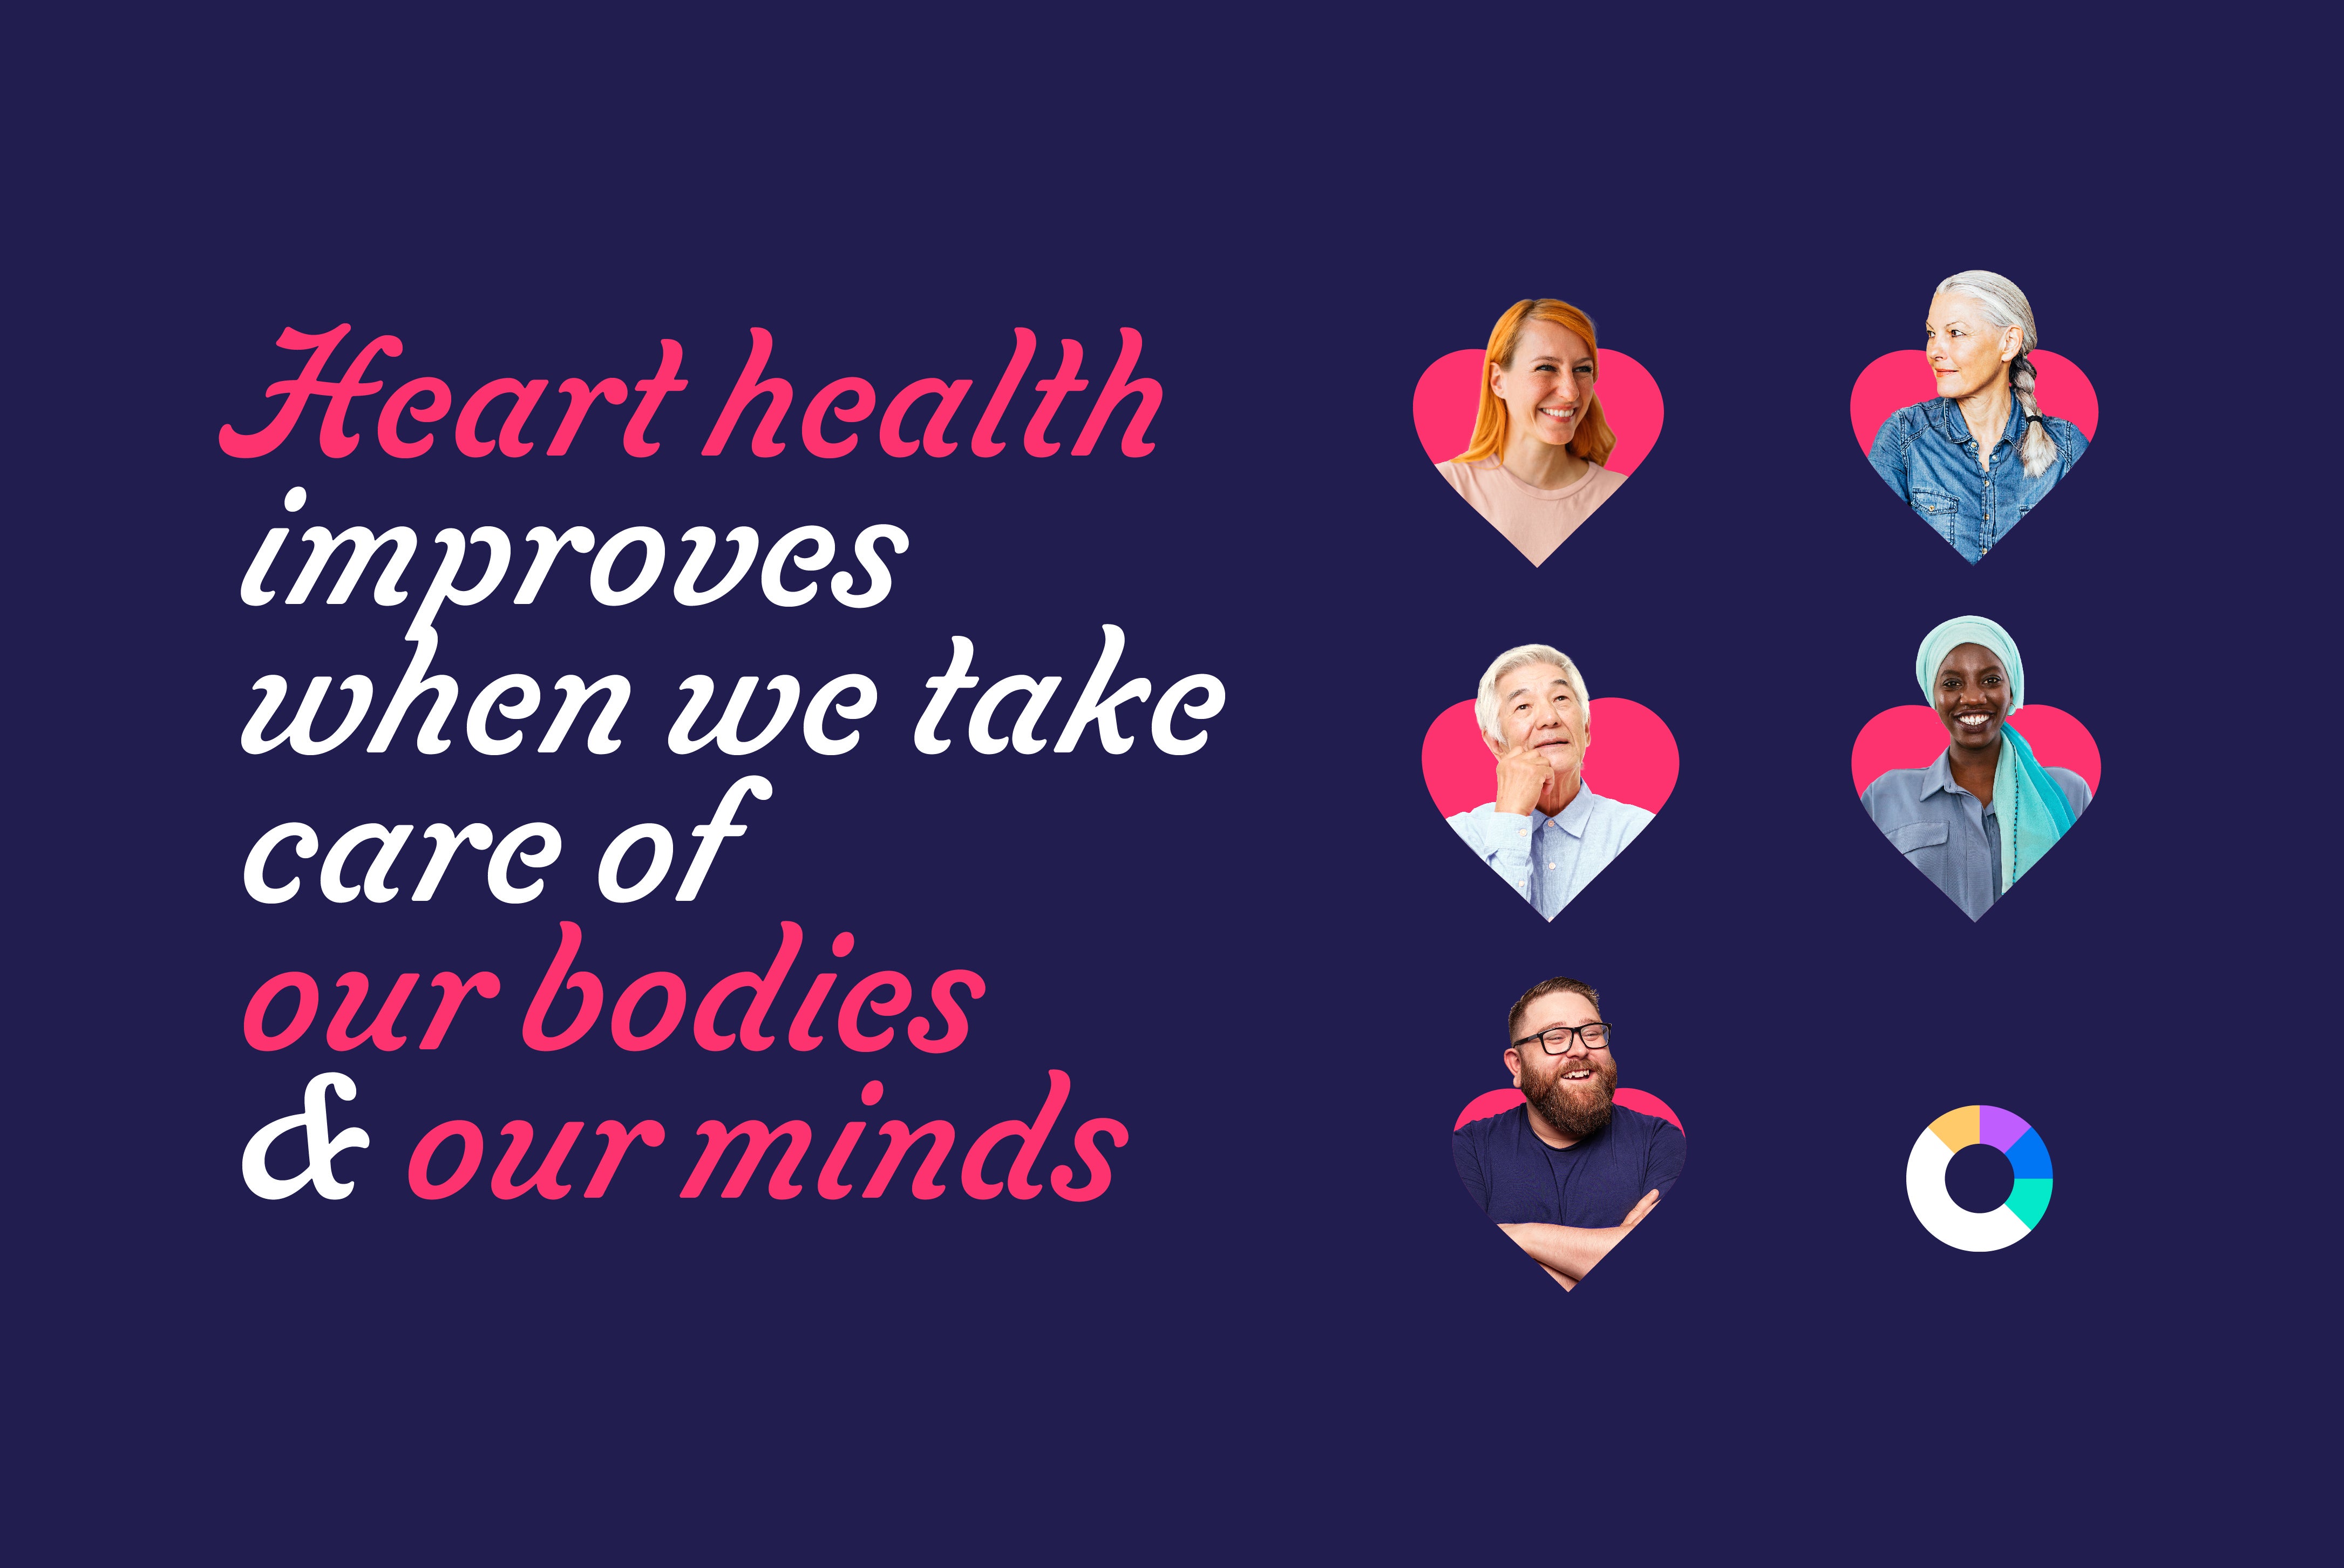 Images of people in heart shapes with the words Heart Health improves when we take care of our minds and bodies